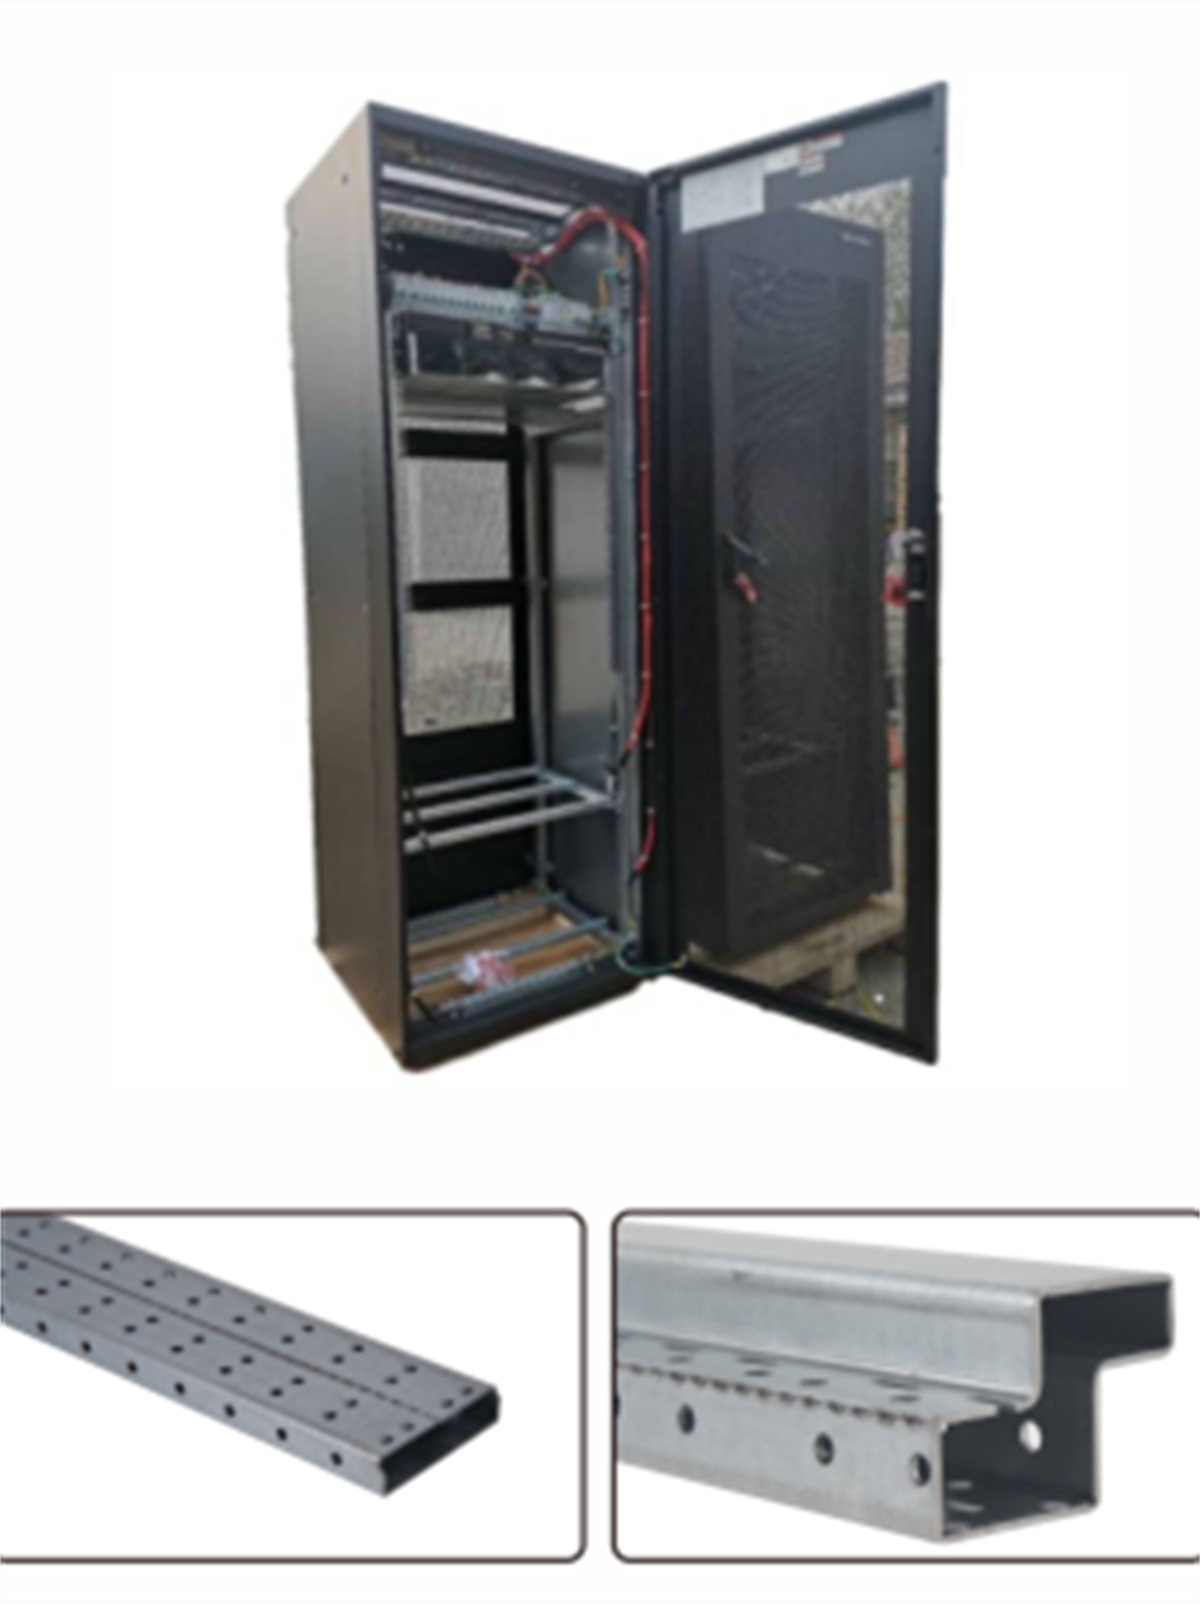 HUAWEI (server cabinet beam & upright) - CUSTOM PRECISION ROLL FORMING SOLUTIONS